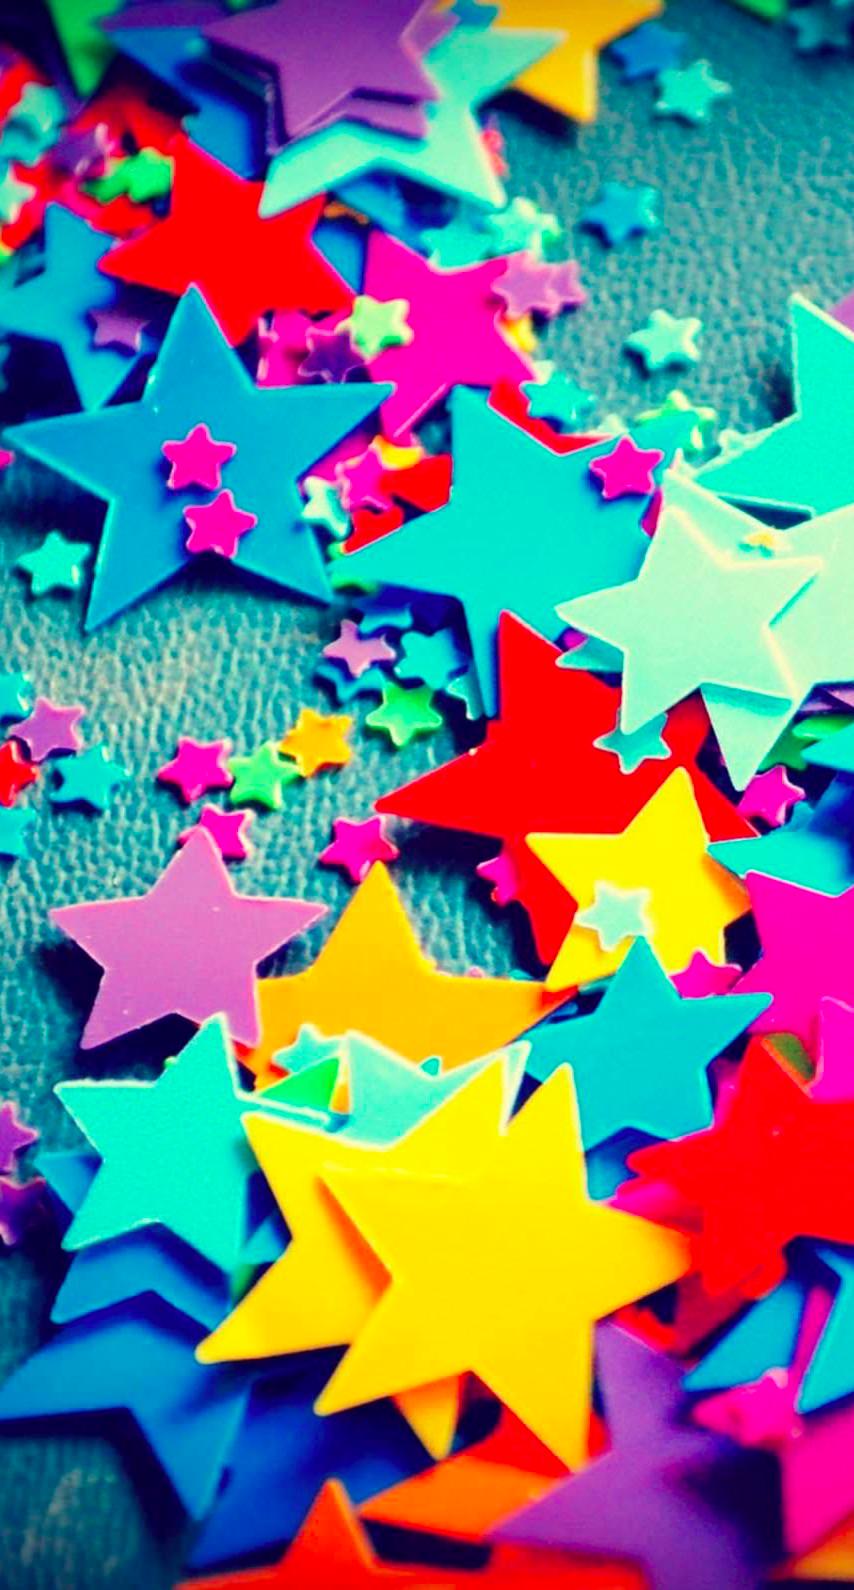 Colorful Star Wallpaper Sc Iphone6s